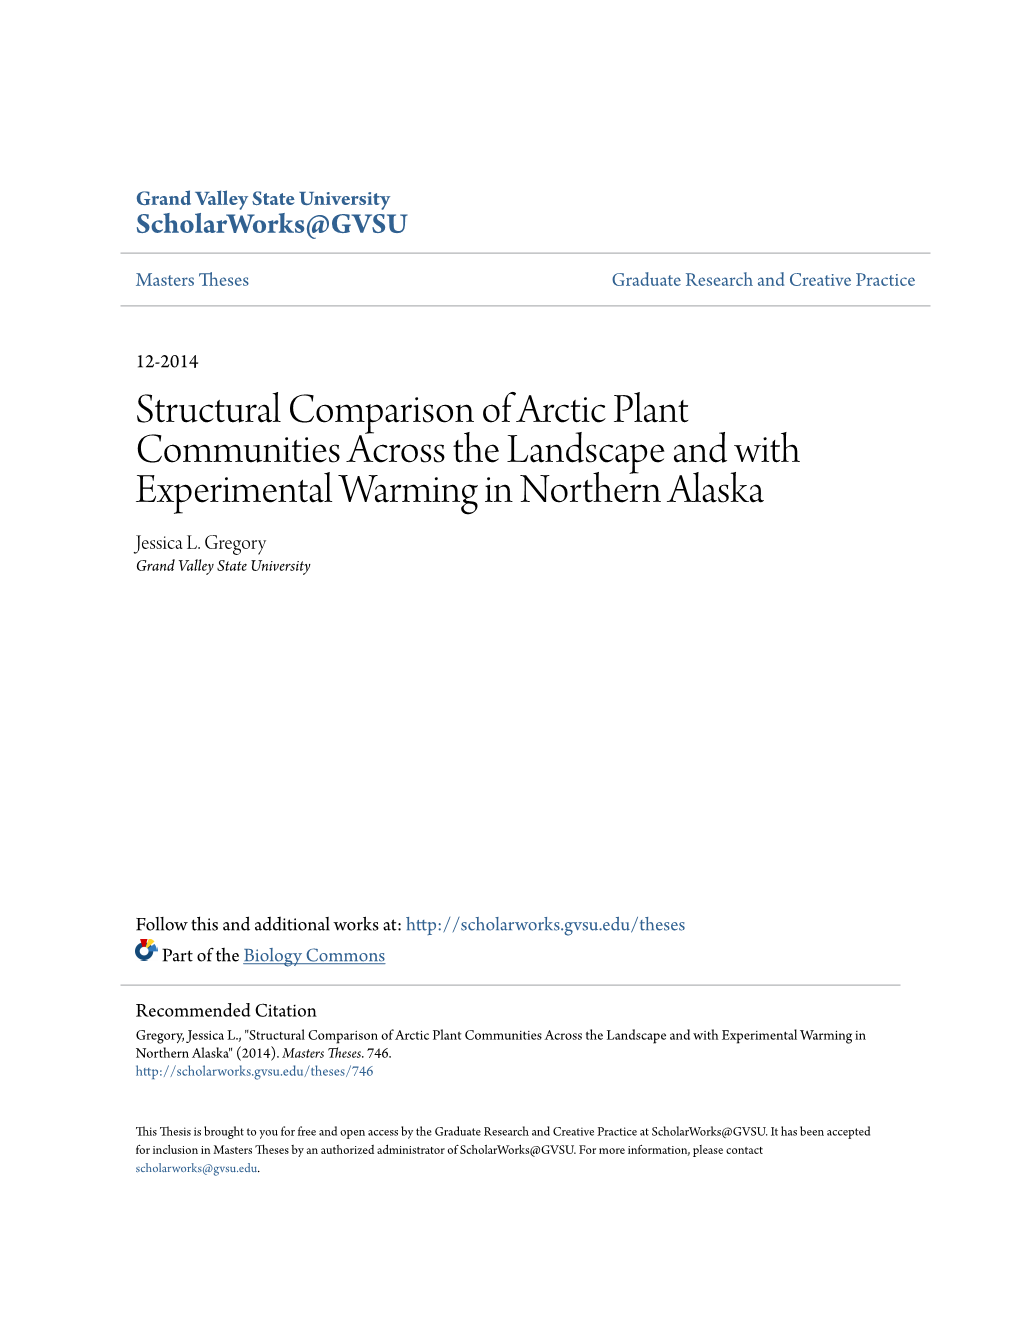 Structural Comparison of Arctic Plant Communities Across the Landscape and with Experimental Warming in Northern Alaska Jessica L